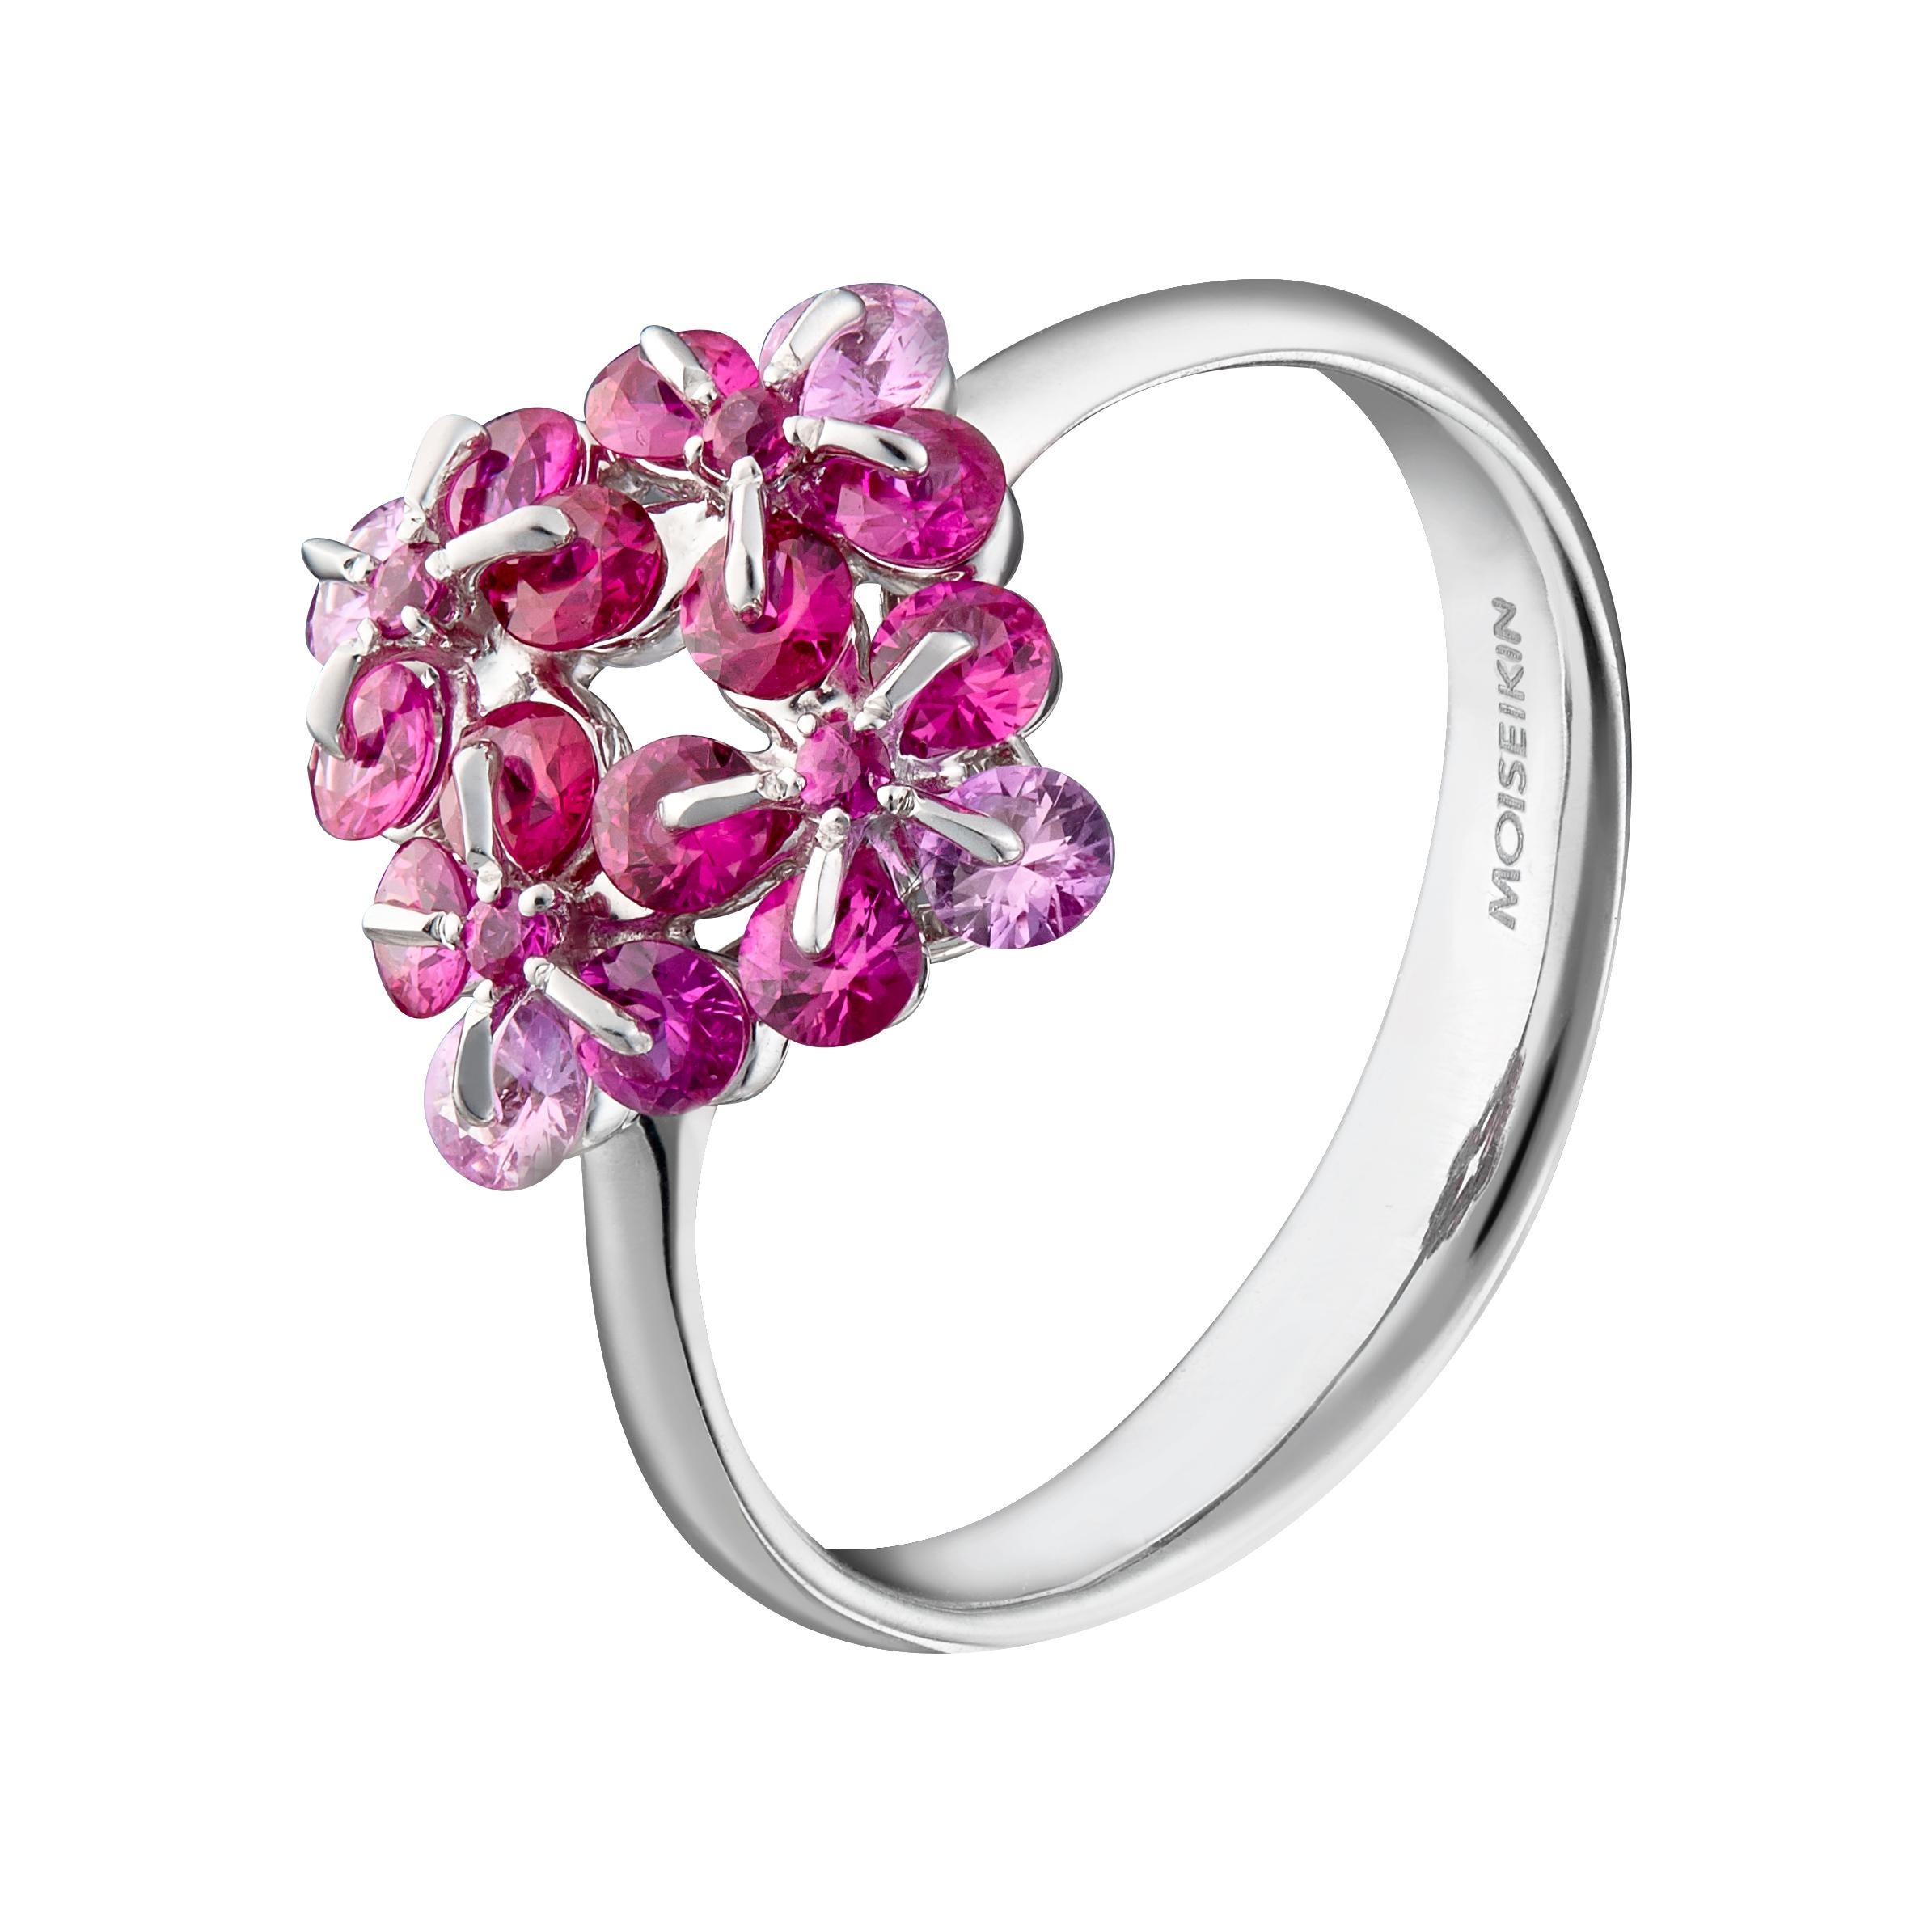 The innovative Russian setting Waltzing Brilliance breaths life into a jewel, making the ring more airy and sparkling!
Diamond-cut ruby graduations are mounted in a delicate flower design. Thanks to the innovation, the stones tremble and rotate as